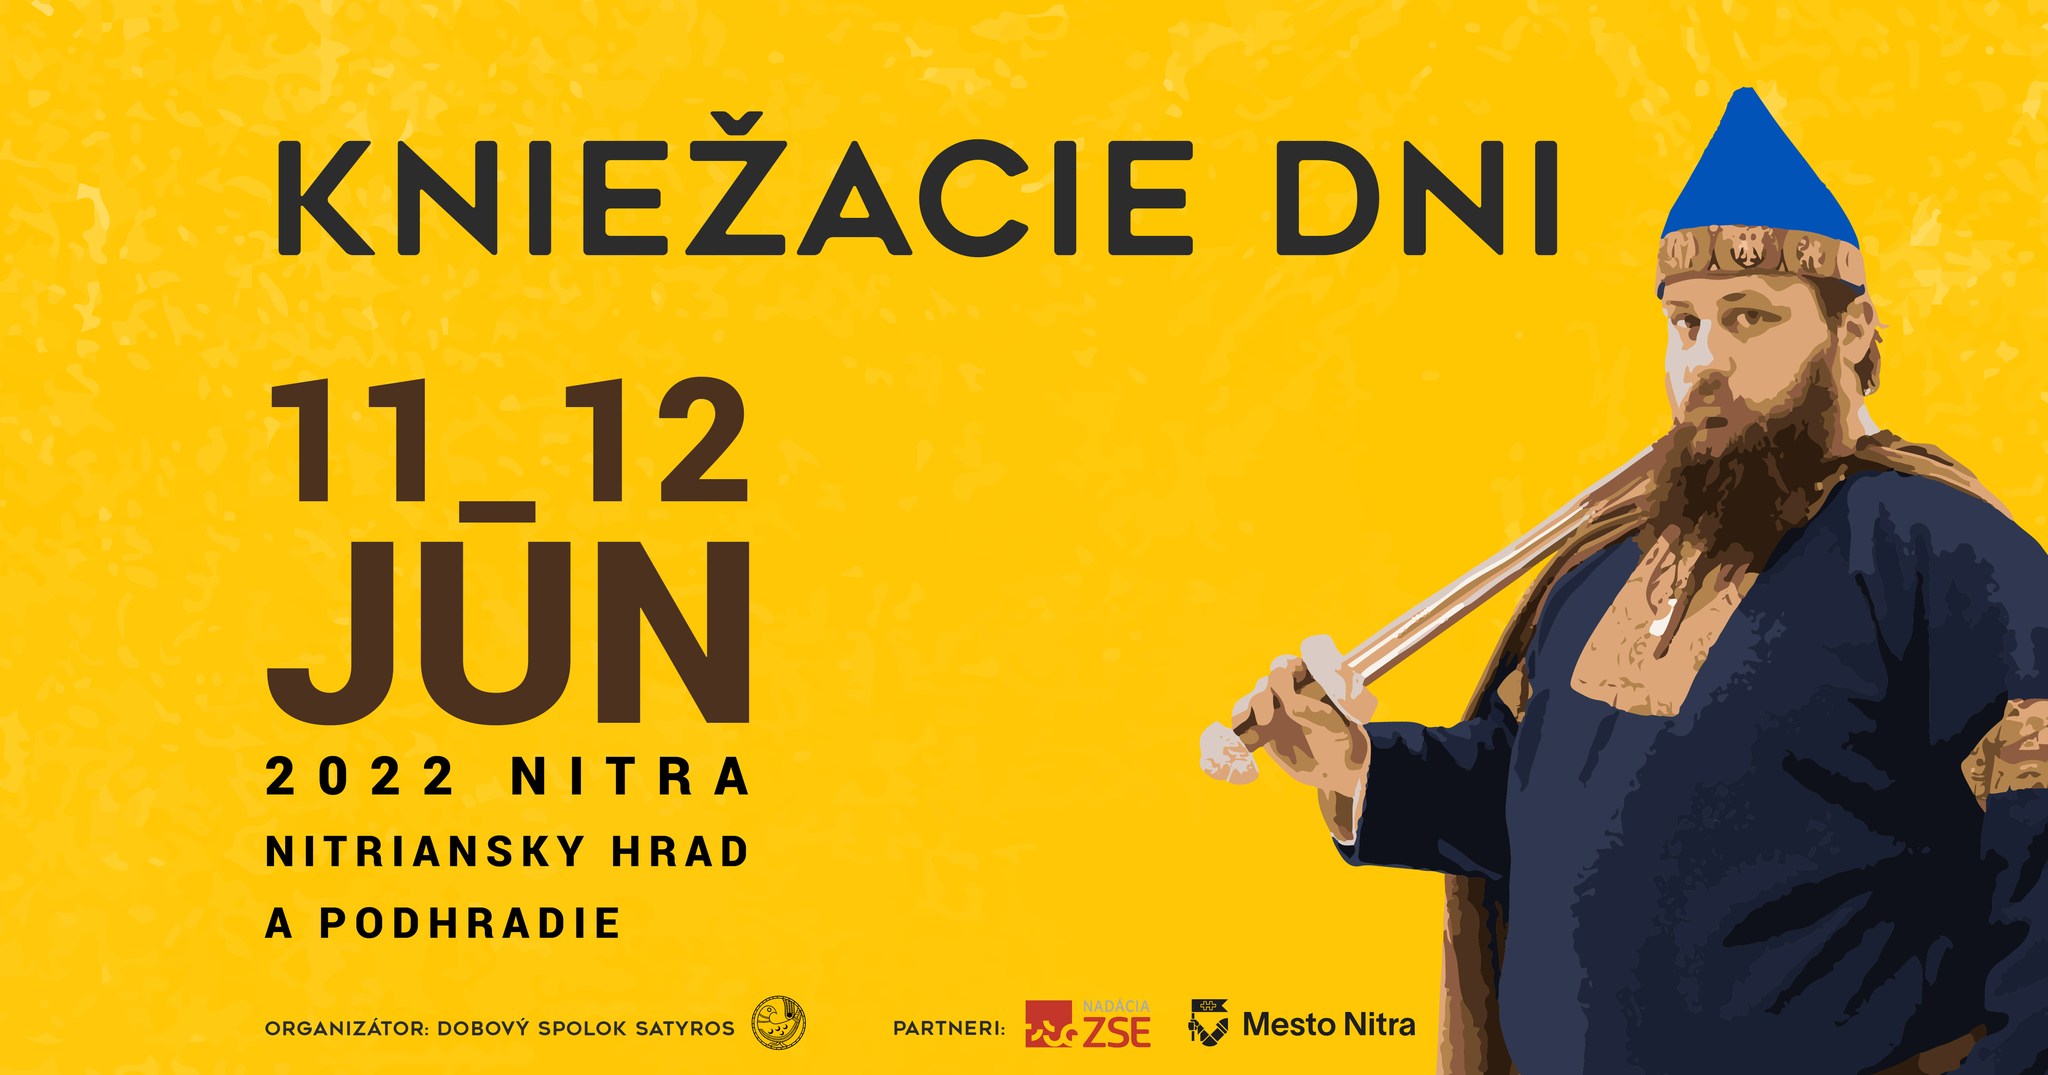 Knieacie dni 2022 Nitra - nult ronk